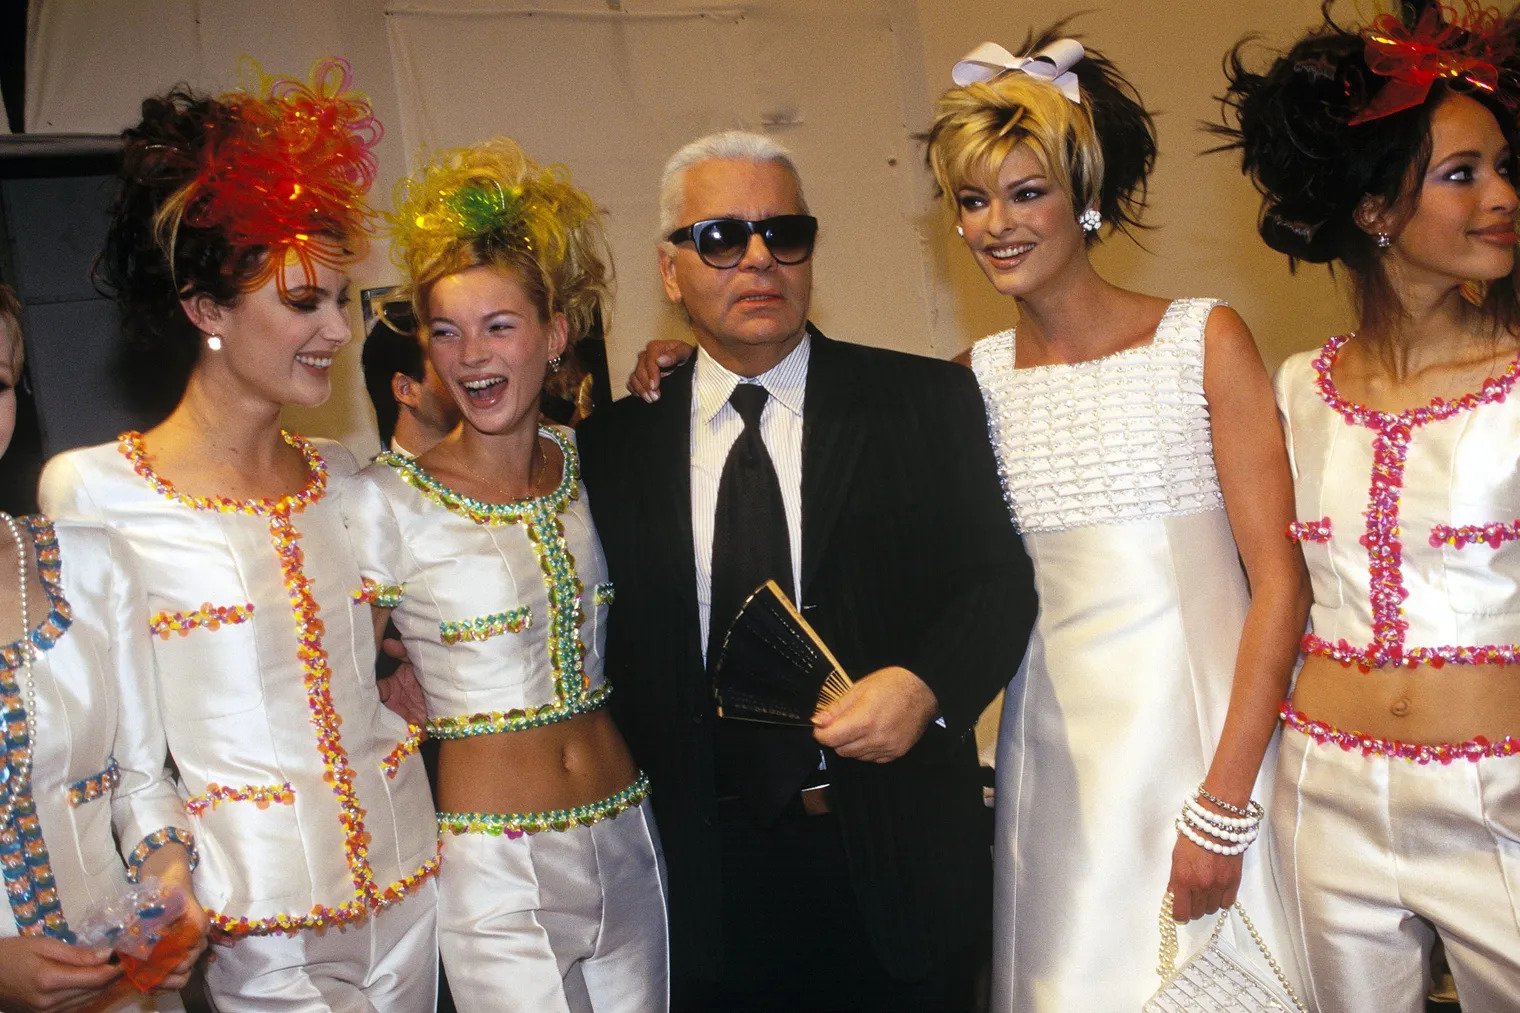 Between Outrage and Adoration: Karl Lagerfeld’s Controversial Career